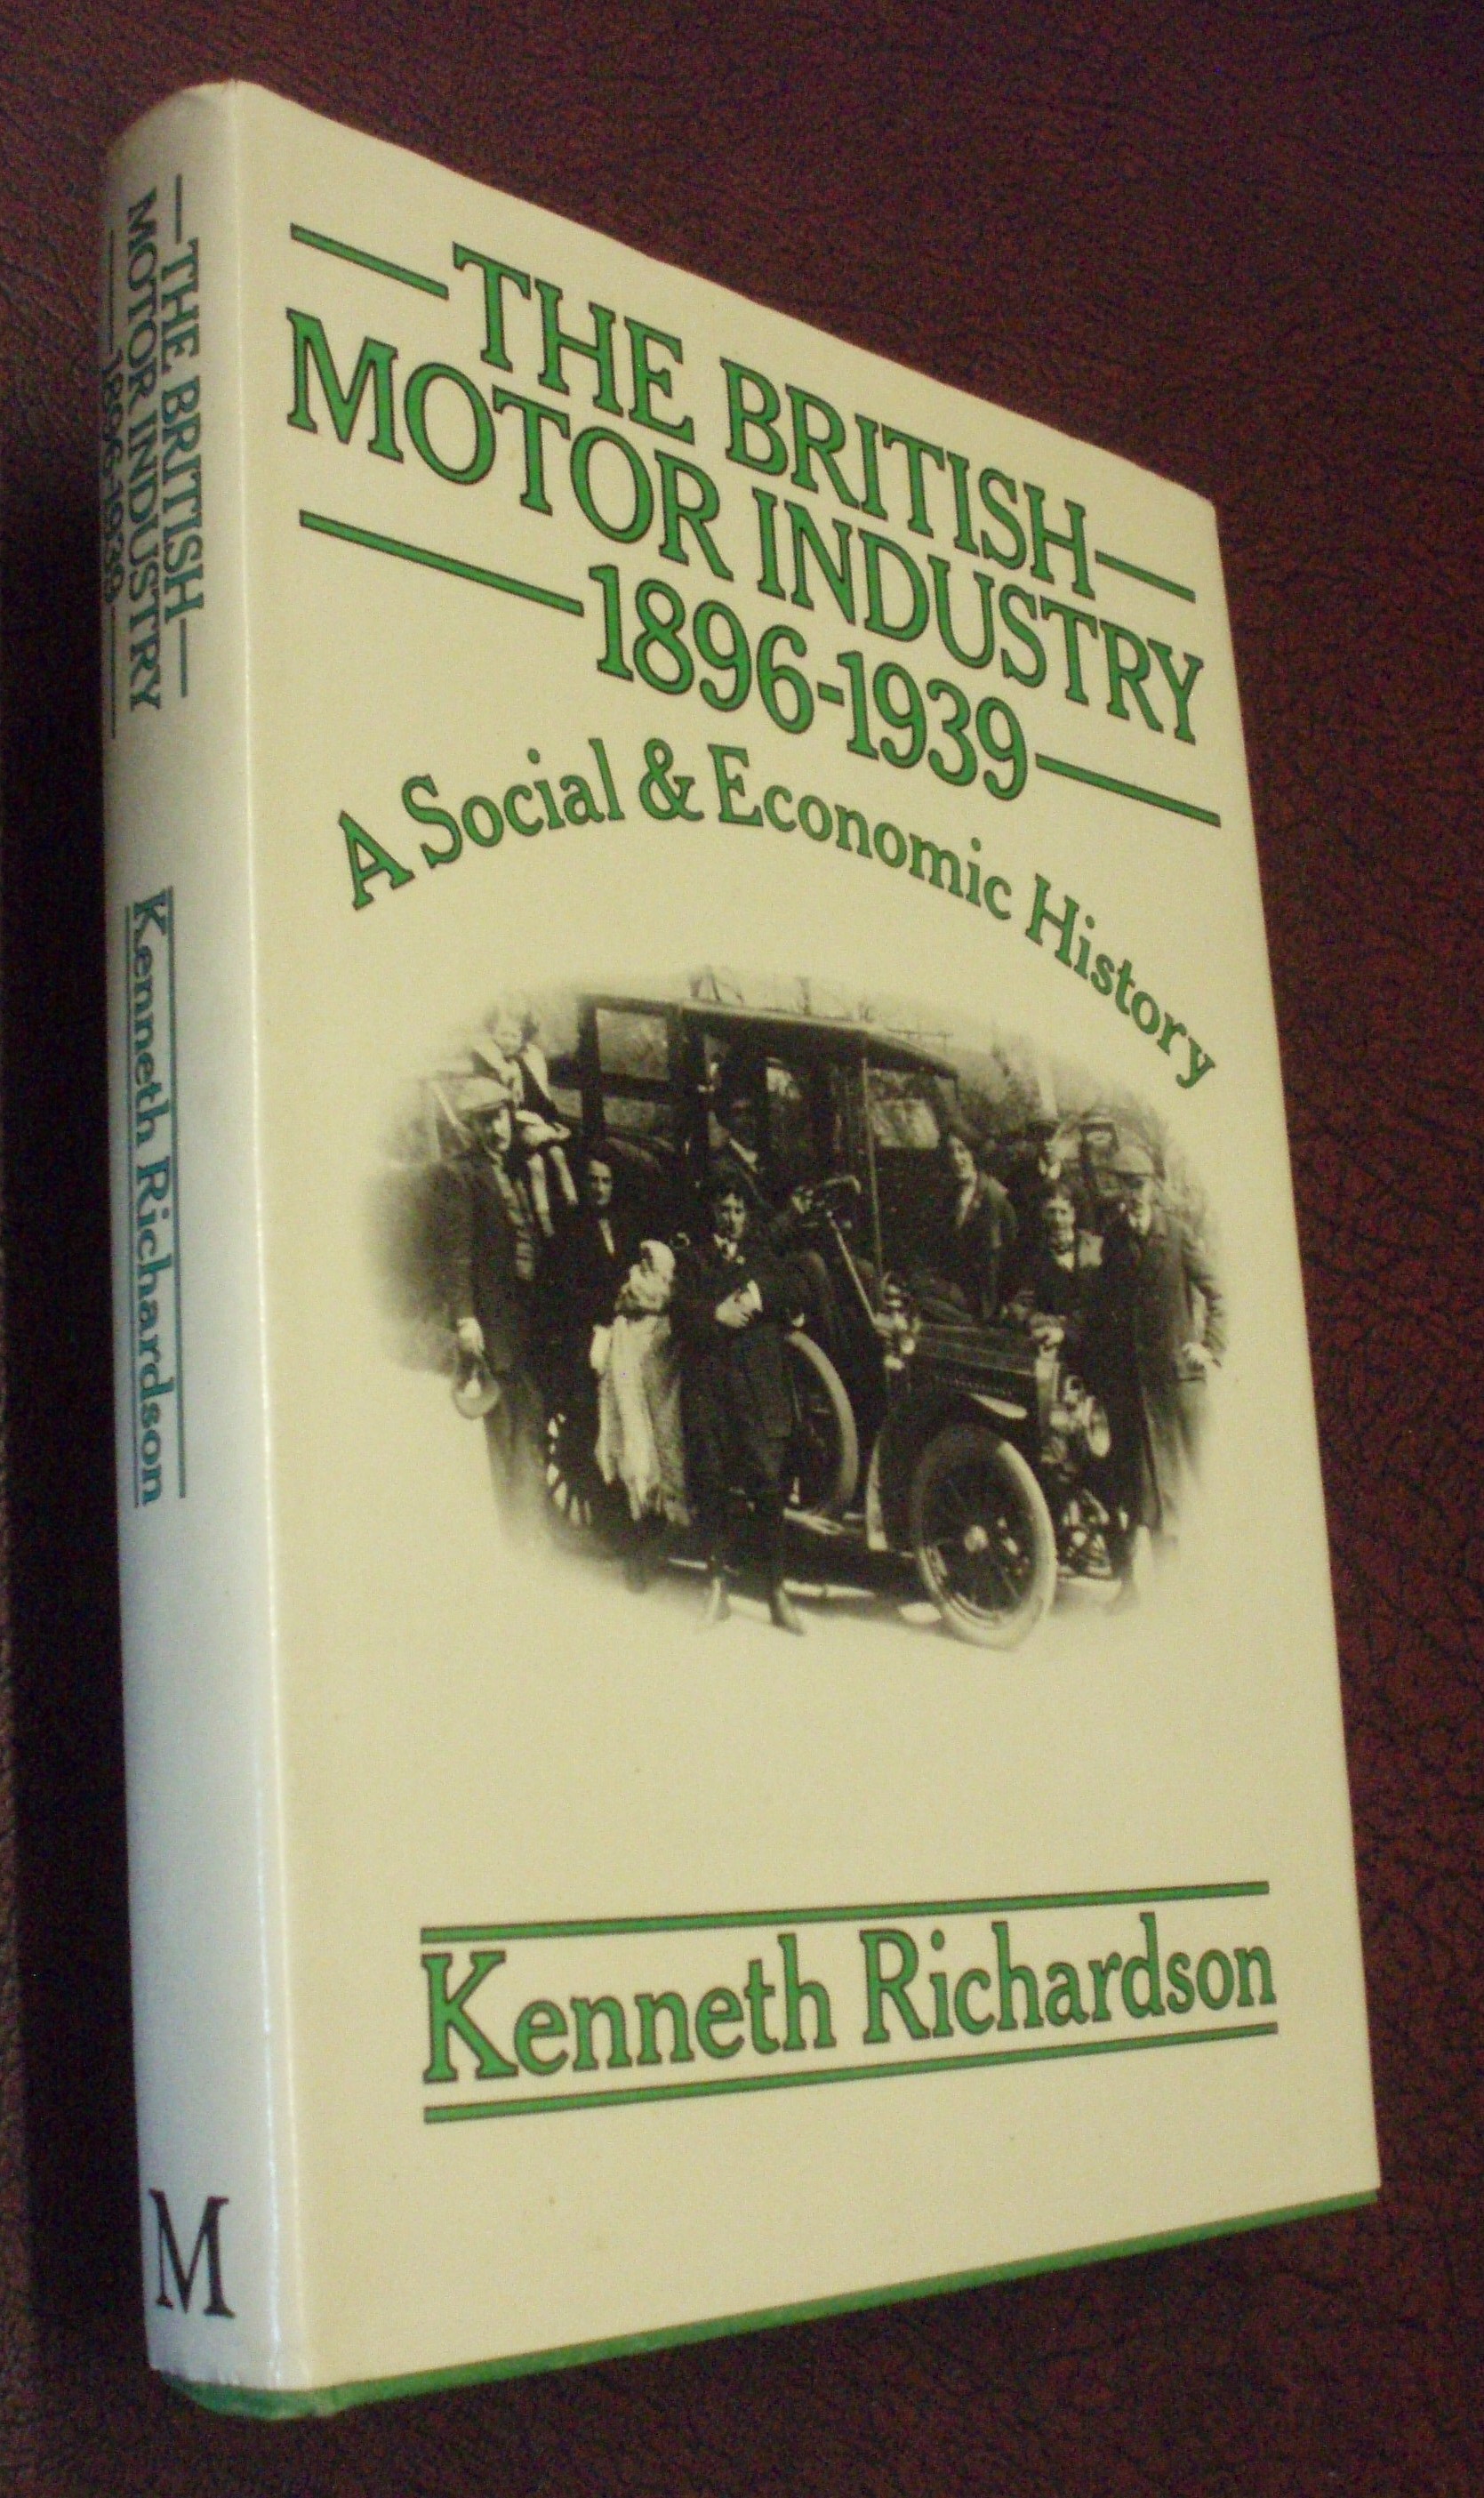 The British Motor Industry 1896-1939 : A Social & Economic History - Kenneth Richardson; Assisted by C N O'Gallagher